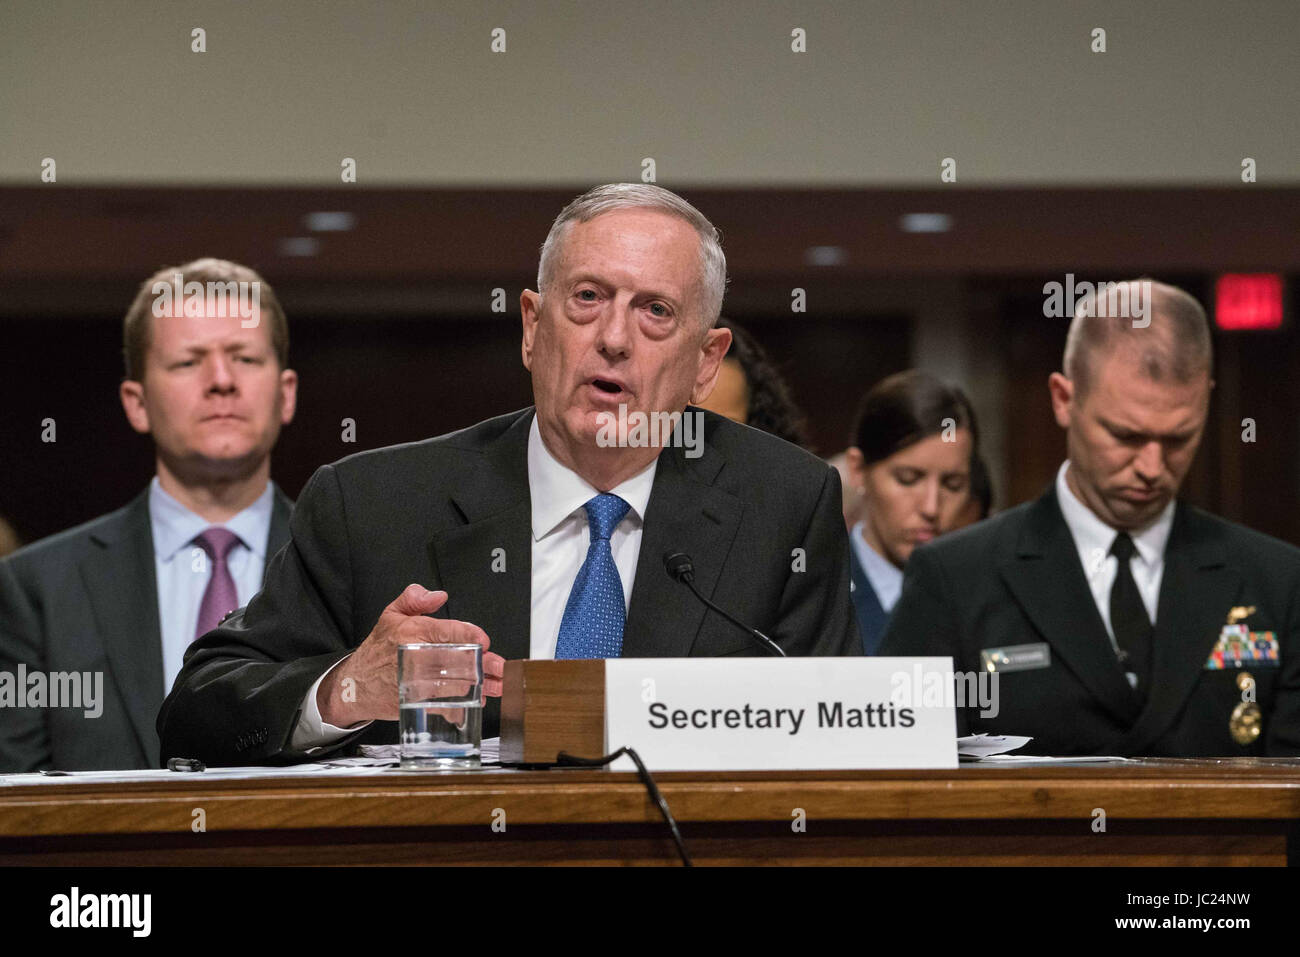 Washington DC, USA. 13th June, 2017. US Secretary of Defense James Mattis testifies during a US House Armed Services Committee hearing on the Fiscal Year 2018 budget on Capitol Hill in Washington. Credit: Ken Cedeno/ZUMA Wire/Alamy Live News Stock Photo